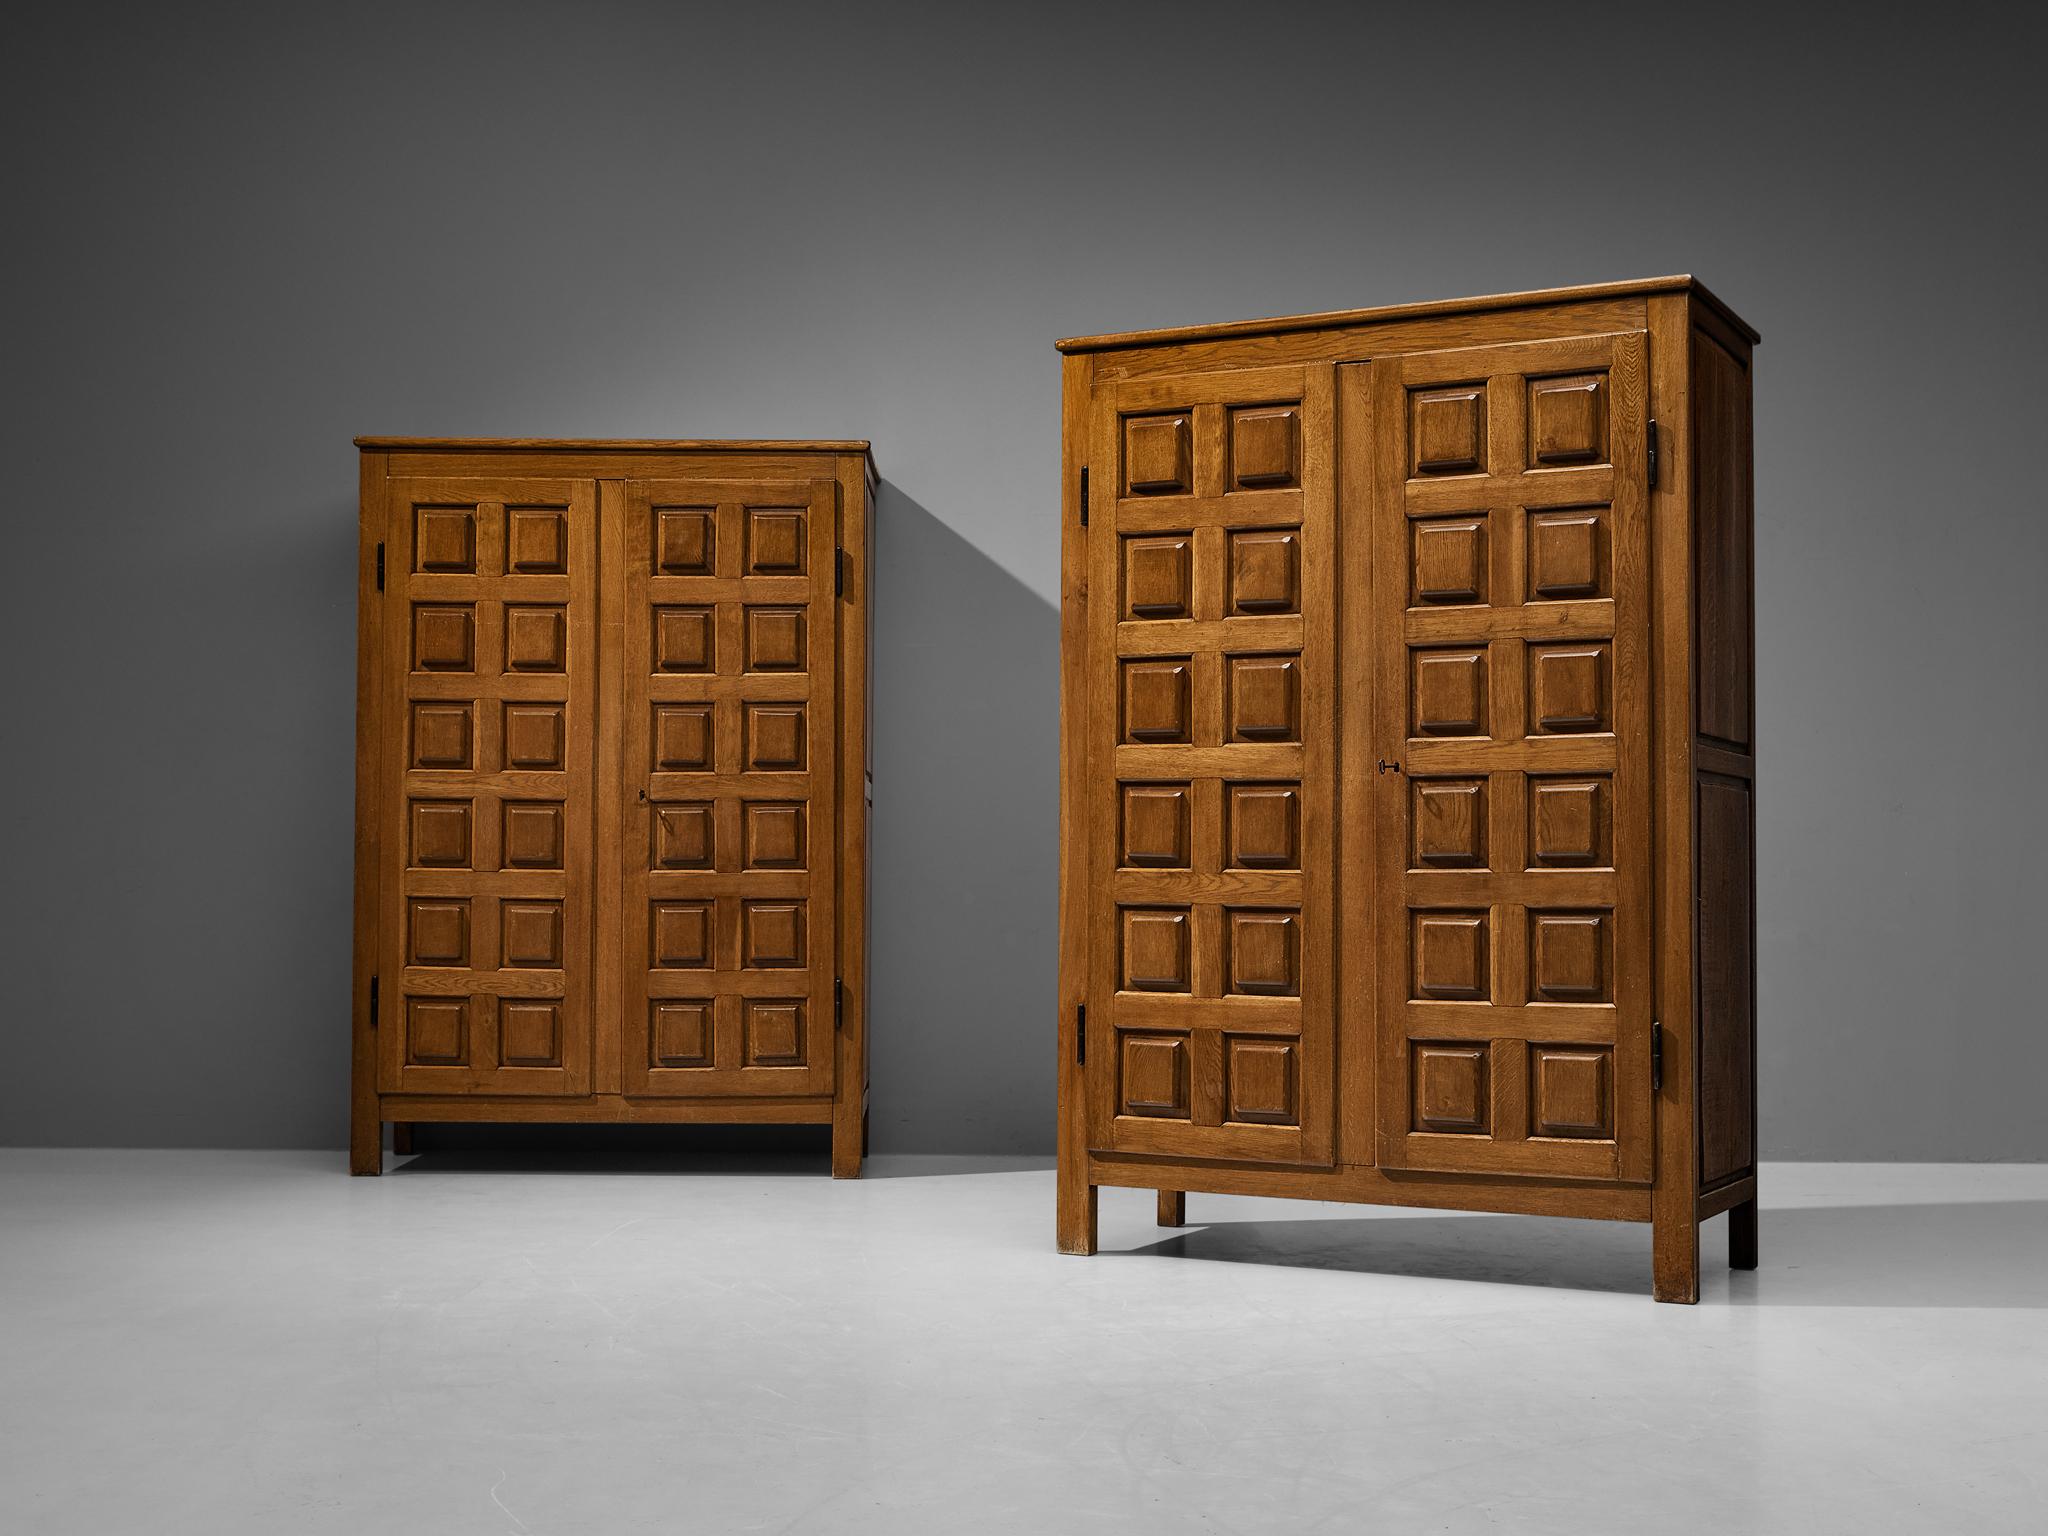 Pair of wardrobes, oak, Italy, 1960s 

This unique pair of wardrobes are based on a well-designed structure where aesthetics and functionally come hand in hand. The front holds the characteristics of the Brutalist Movement, featuring a rhythmic